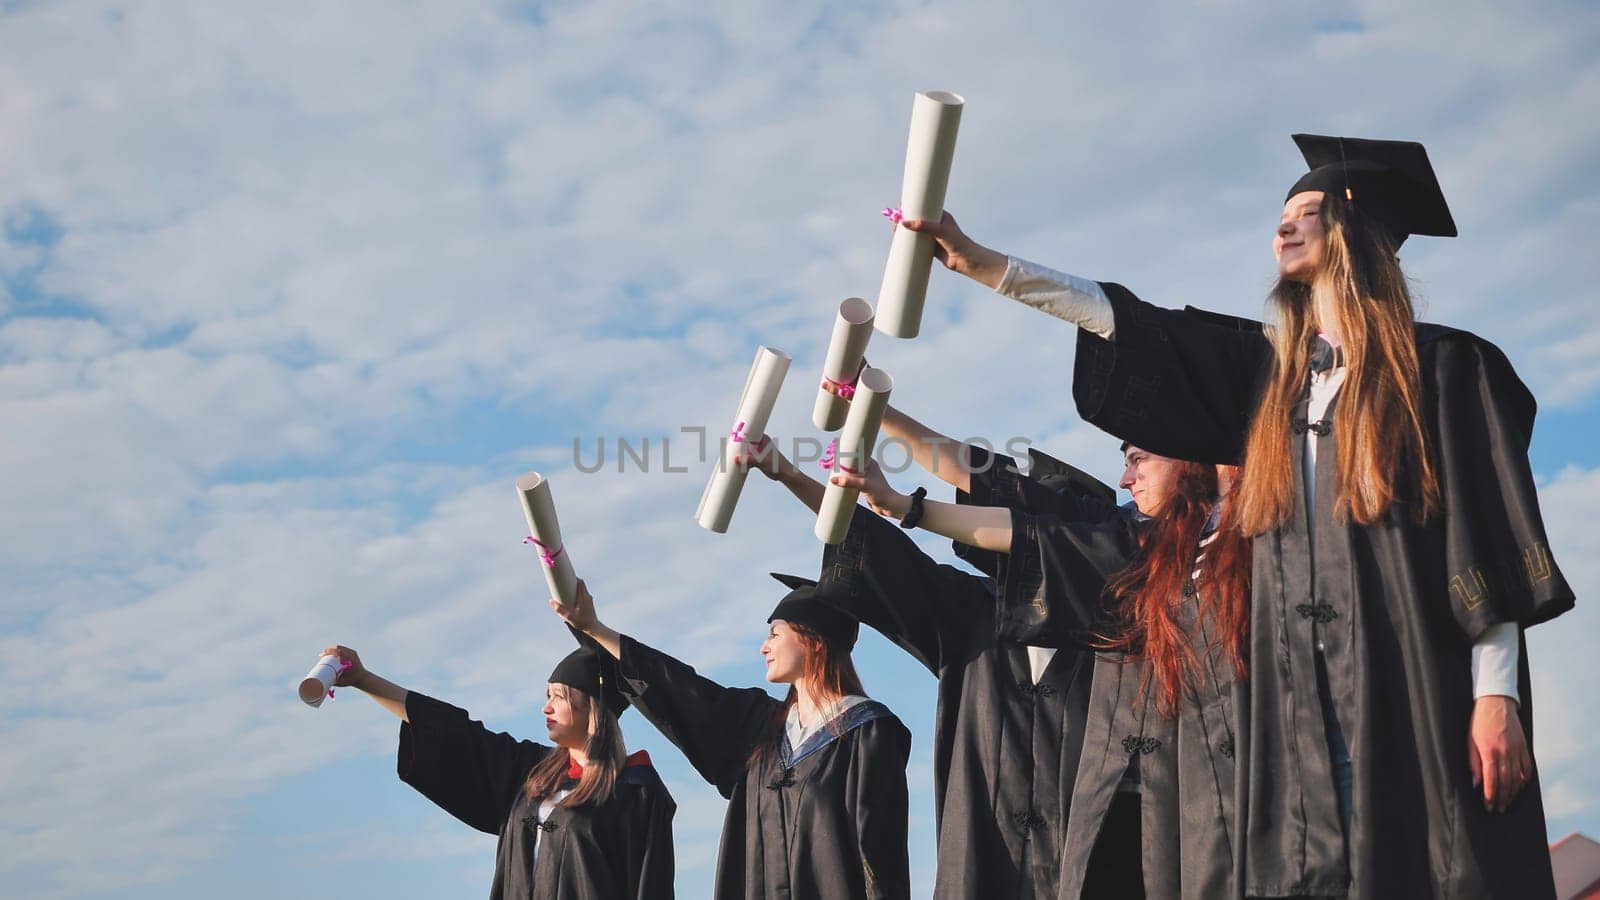 Cheerful graduates pose with raised diplomas on a sunny day